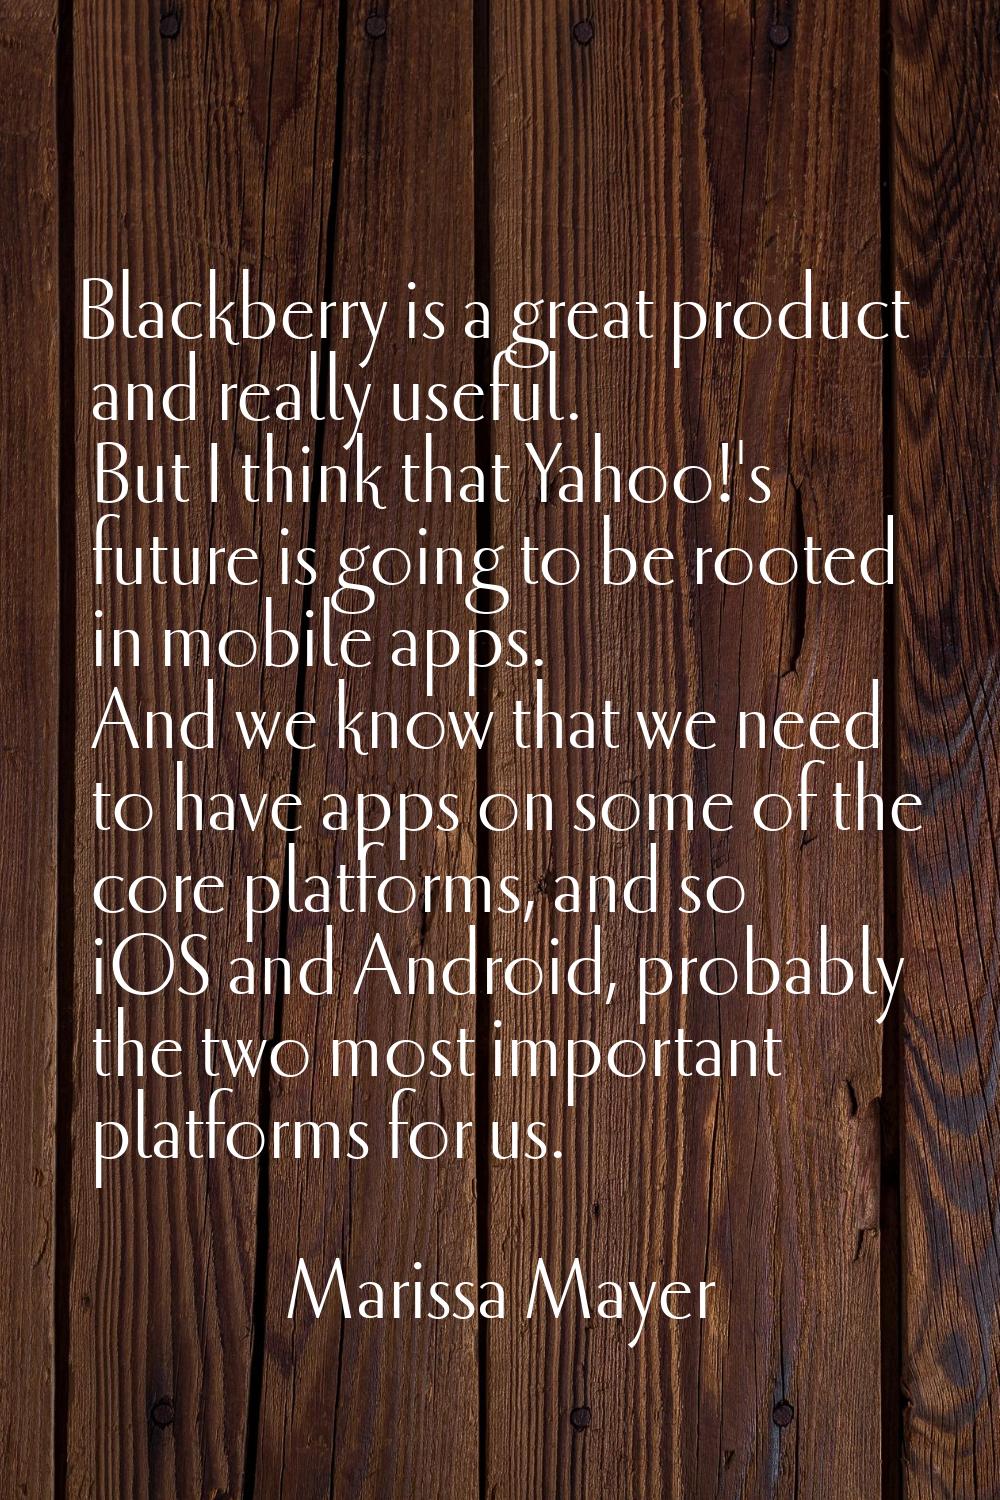 Blackberry is a great product and really useful. But I think that Yahoo!'s future is going to be ro